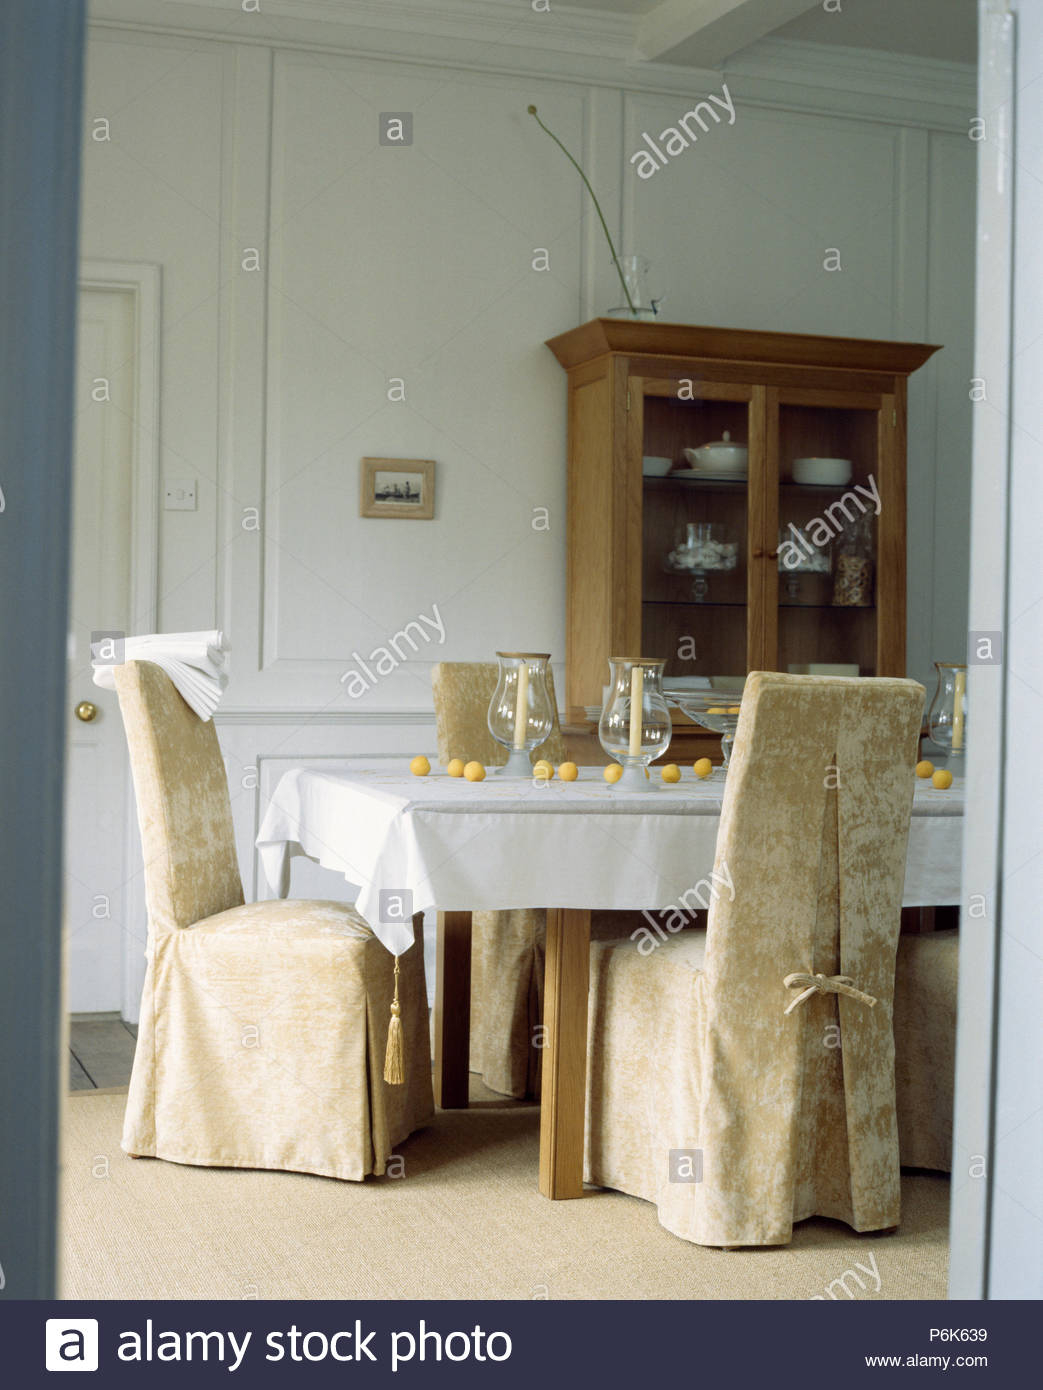 Cream Patterned Loose Covers On Chairs At Table With White within dimensions 1043 X 1390